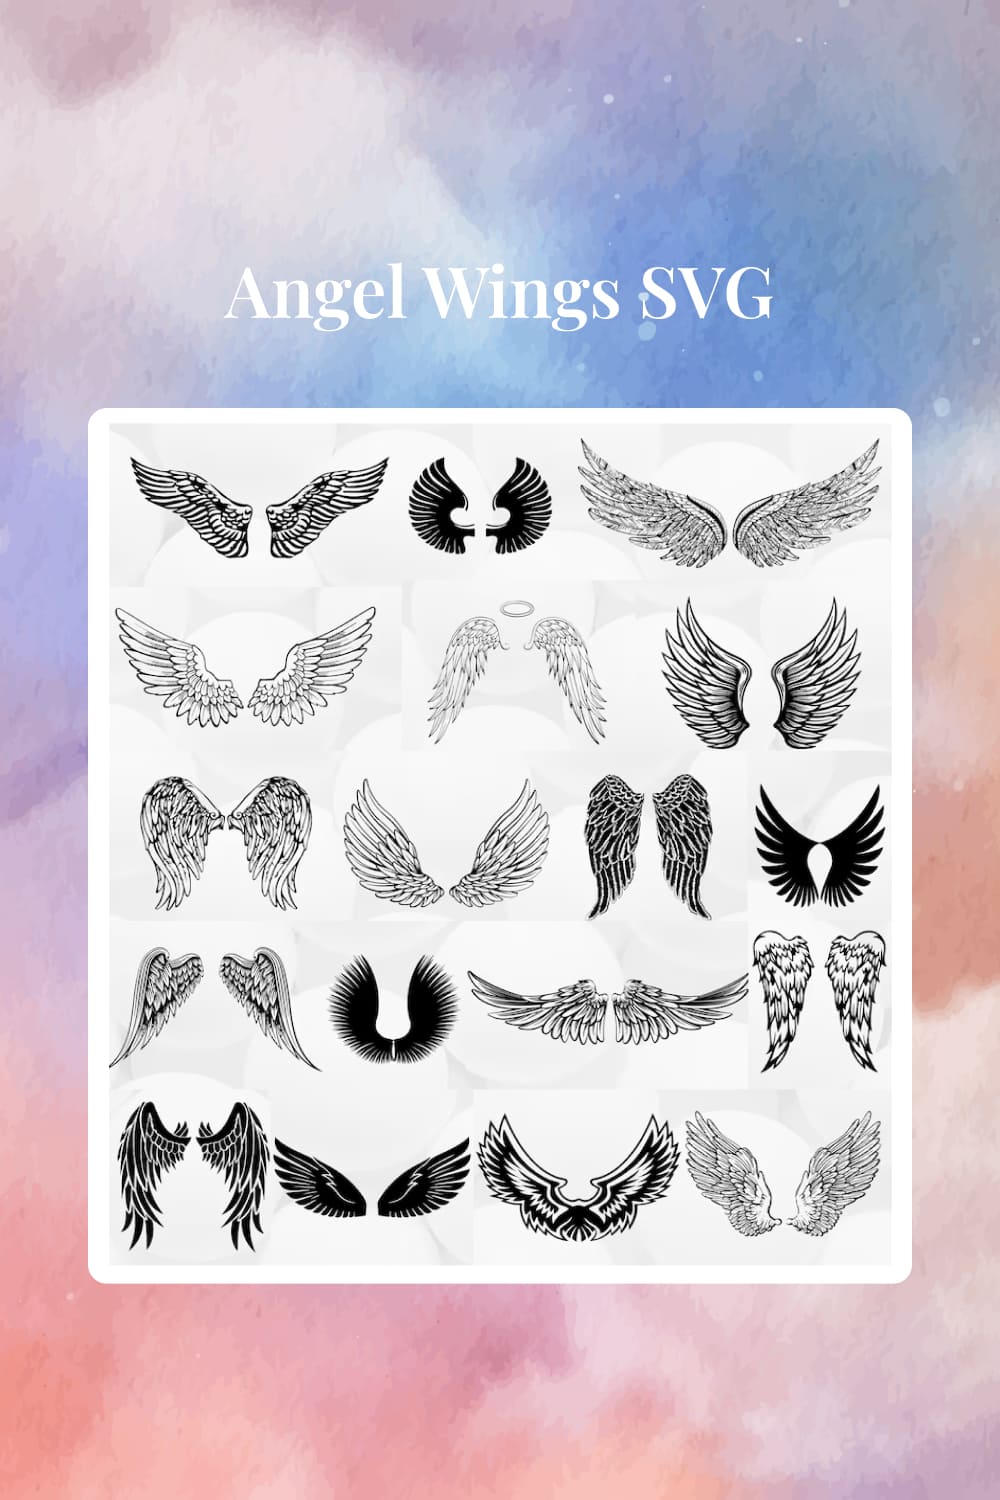 Collage of images of angel wings in light and dark design.